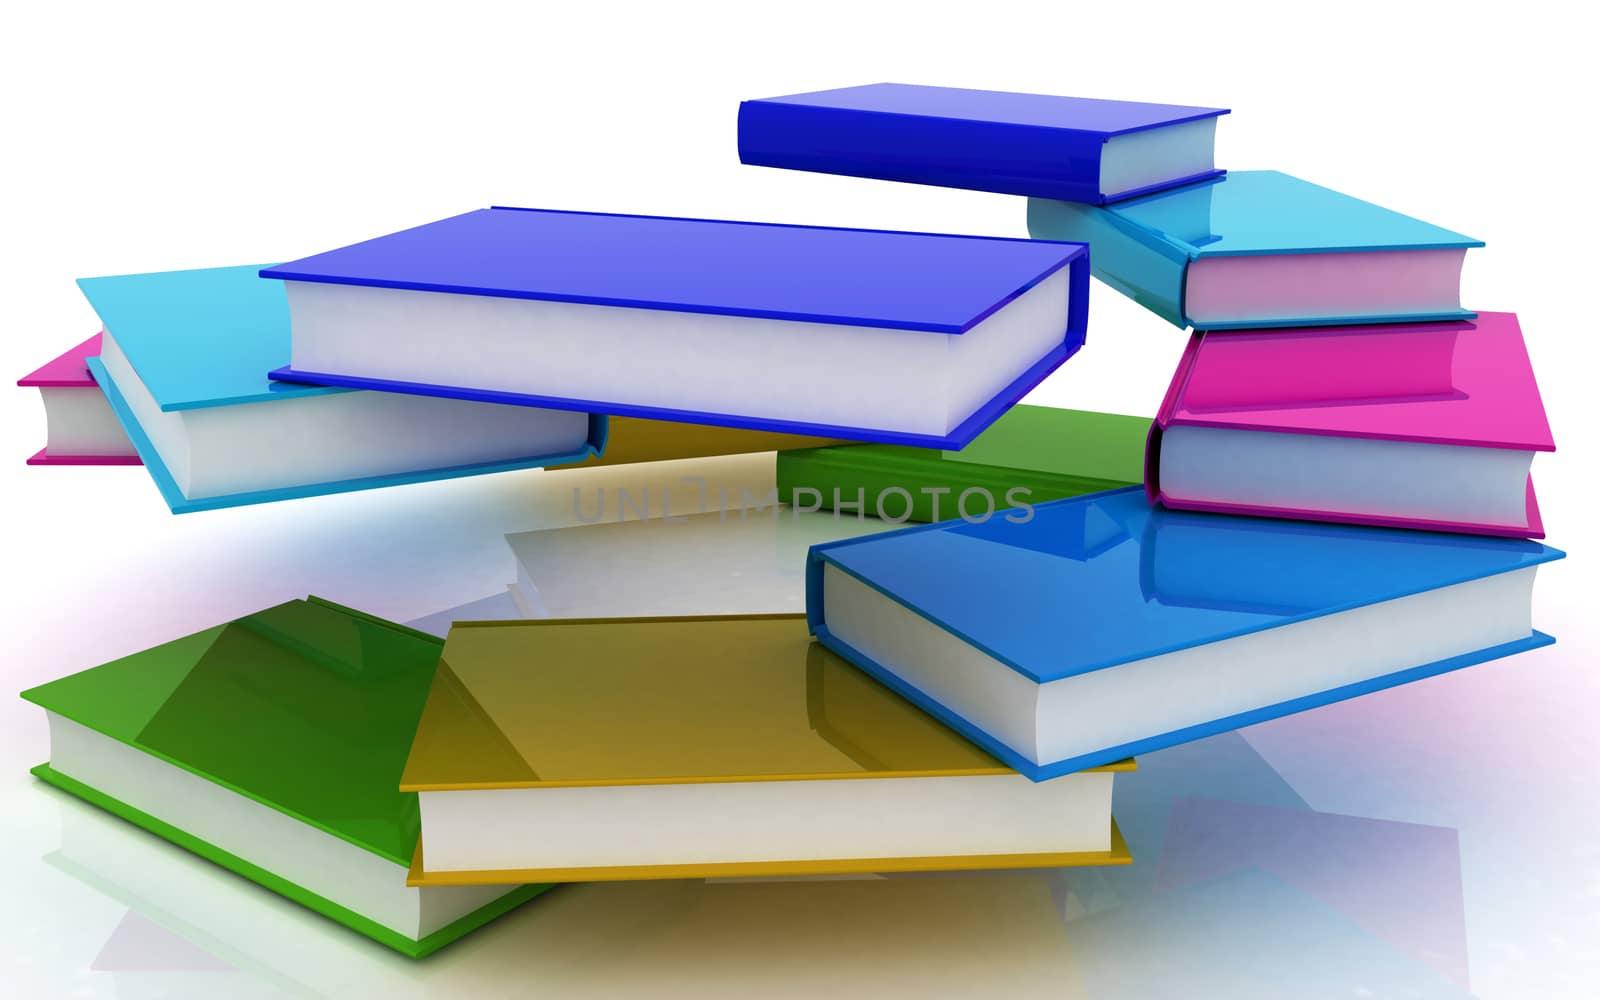 colorful real books on a white background